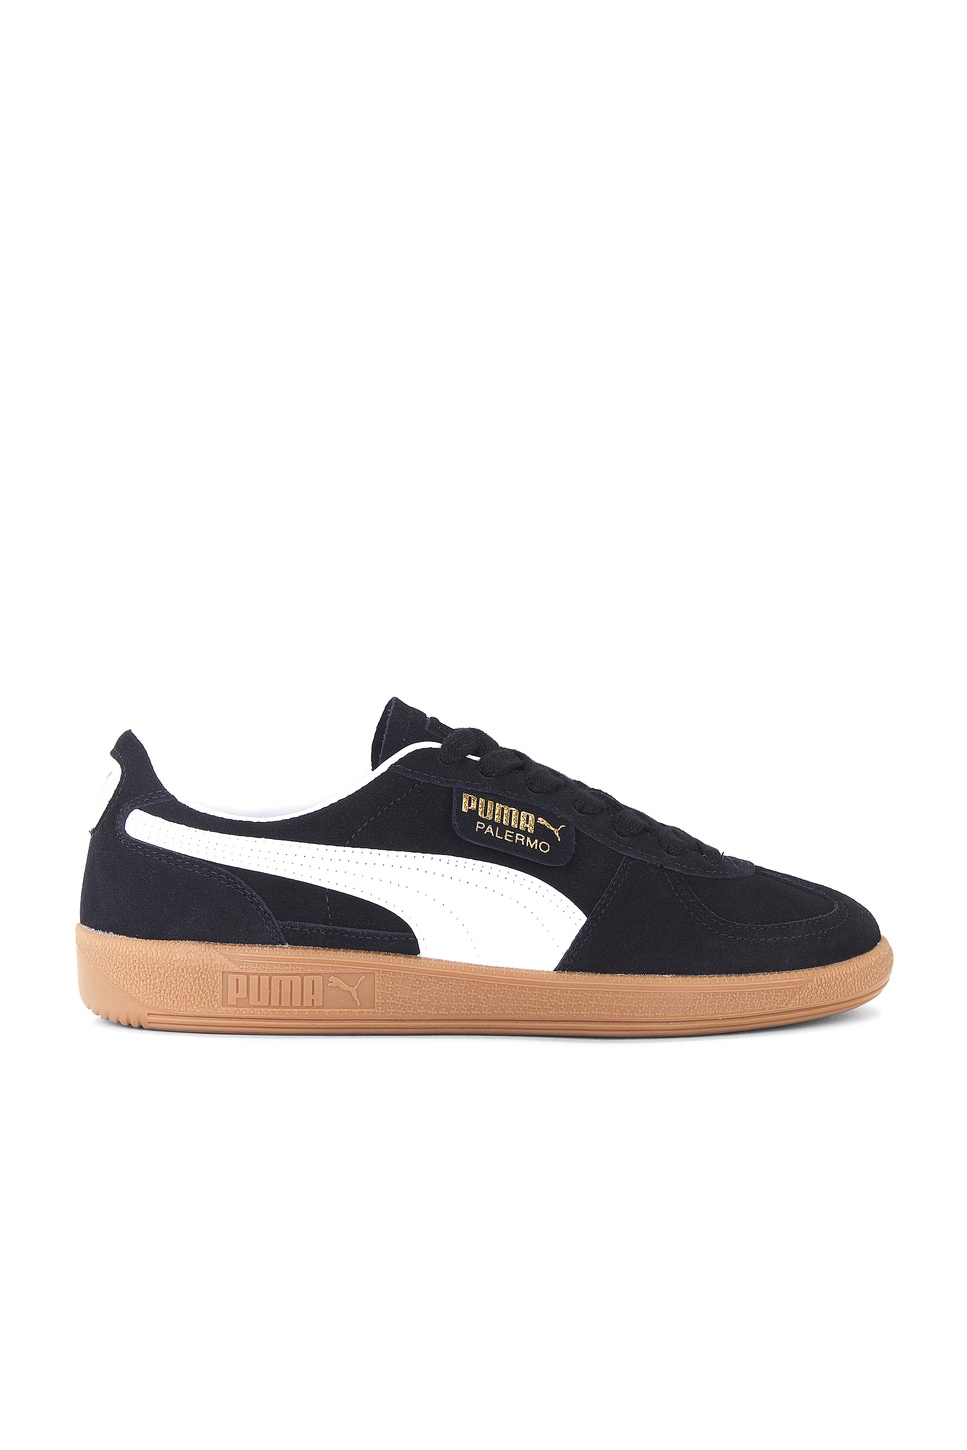 Image 1 of Puma Select Palerrmo in Black